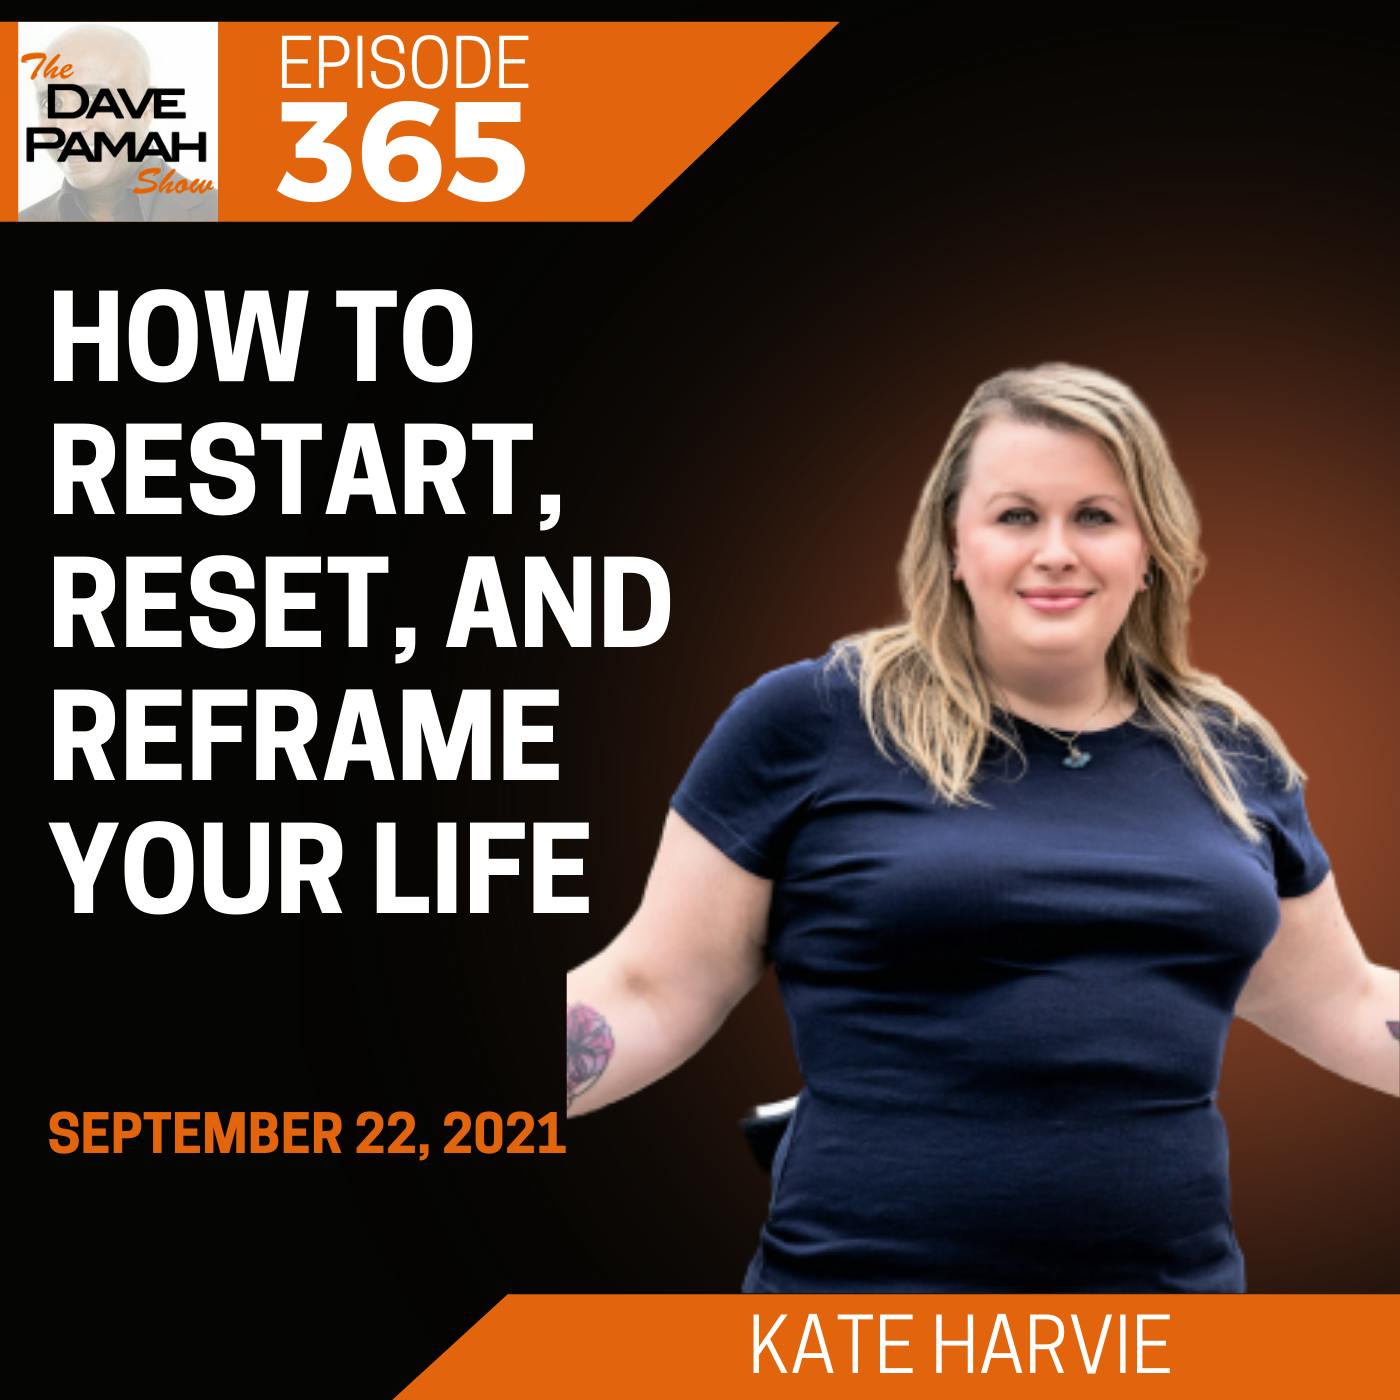 How to Restart, Reset, and Reframe Your Life with Kate Harvie Image